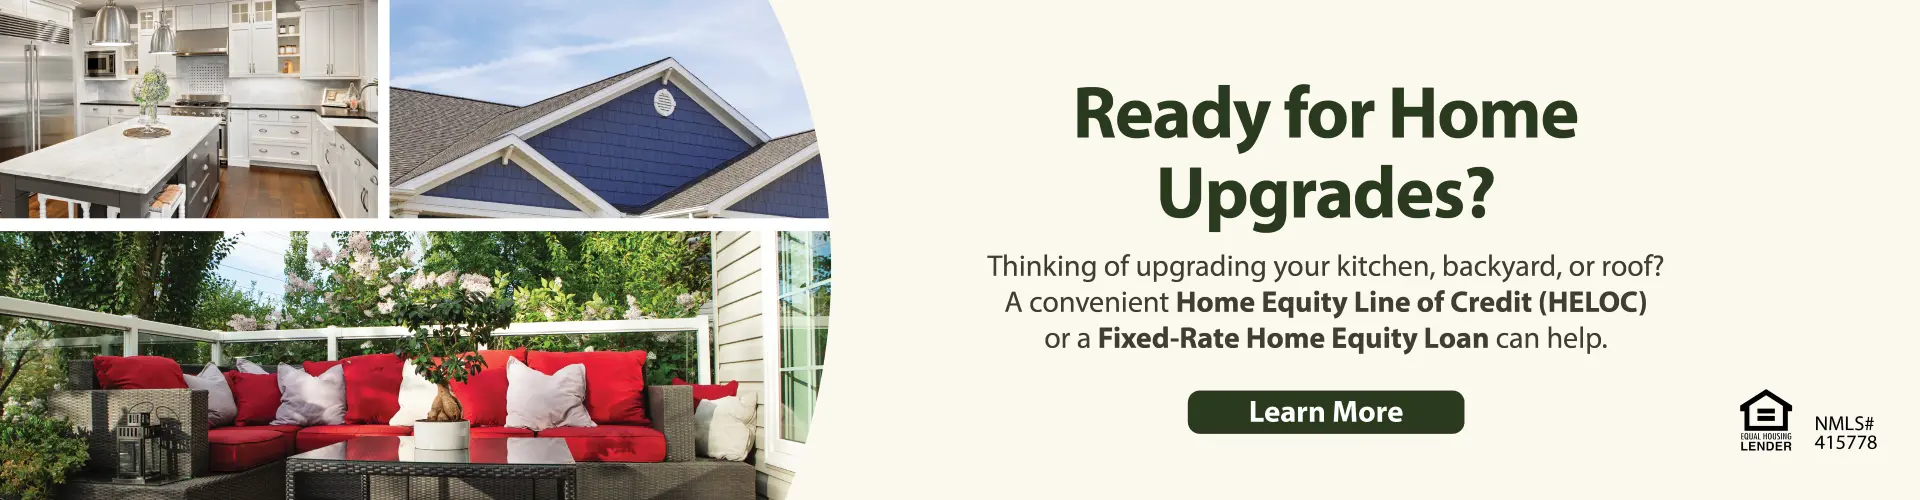 Ready for Home Upgrades?